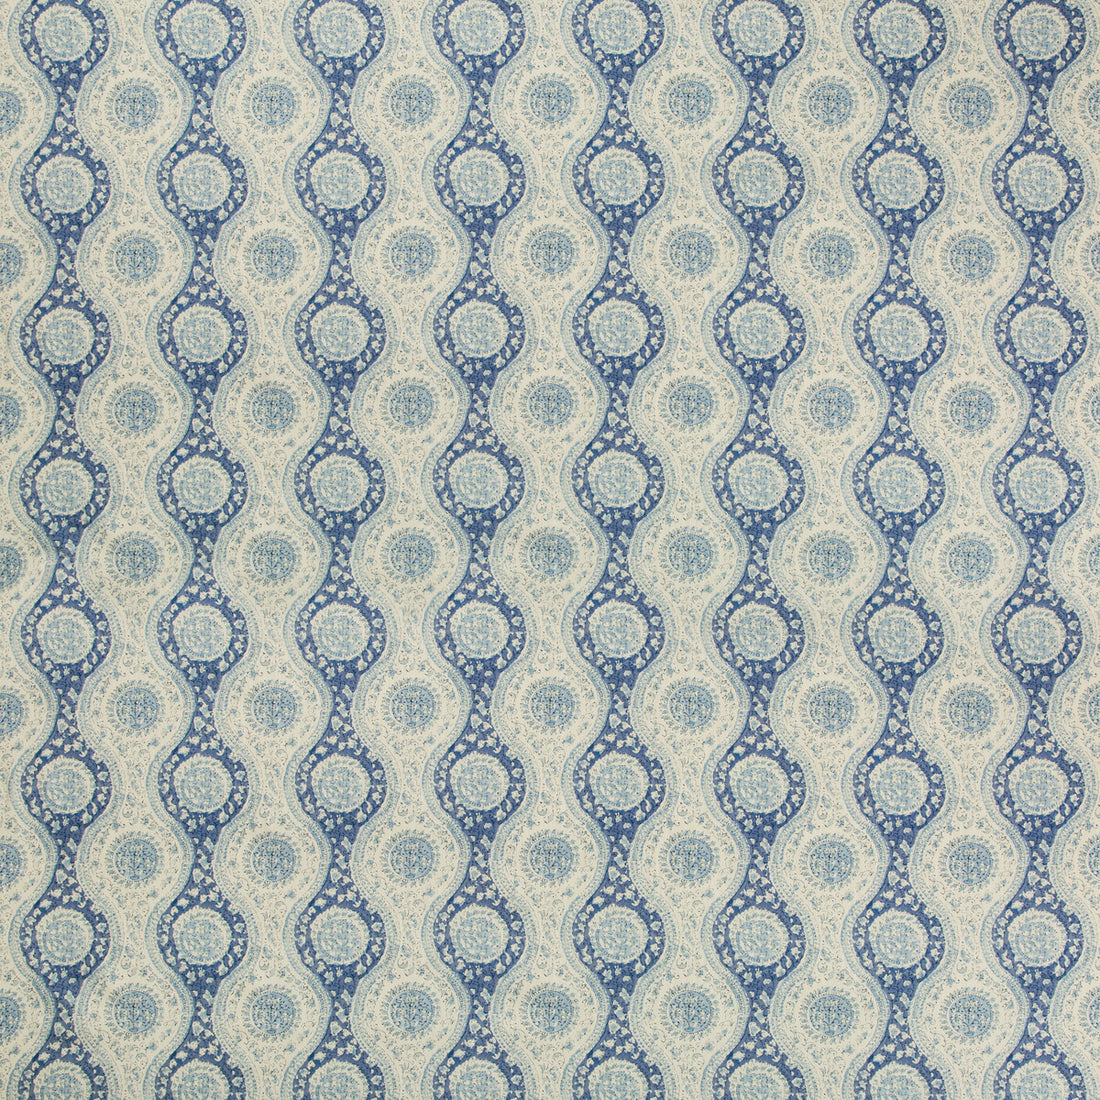 Nadari Print fabric in blue color - pattern 8019129.515.0 - by Brunschwig &amp; Fils in the Folio Francais collection